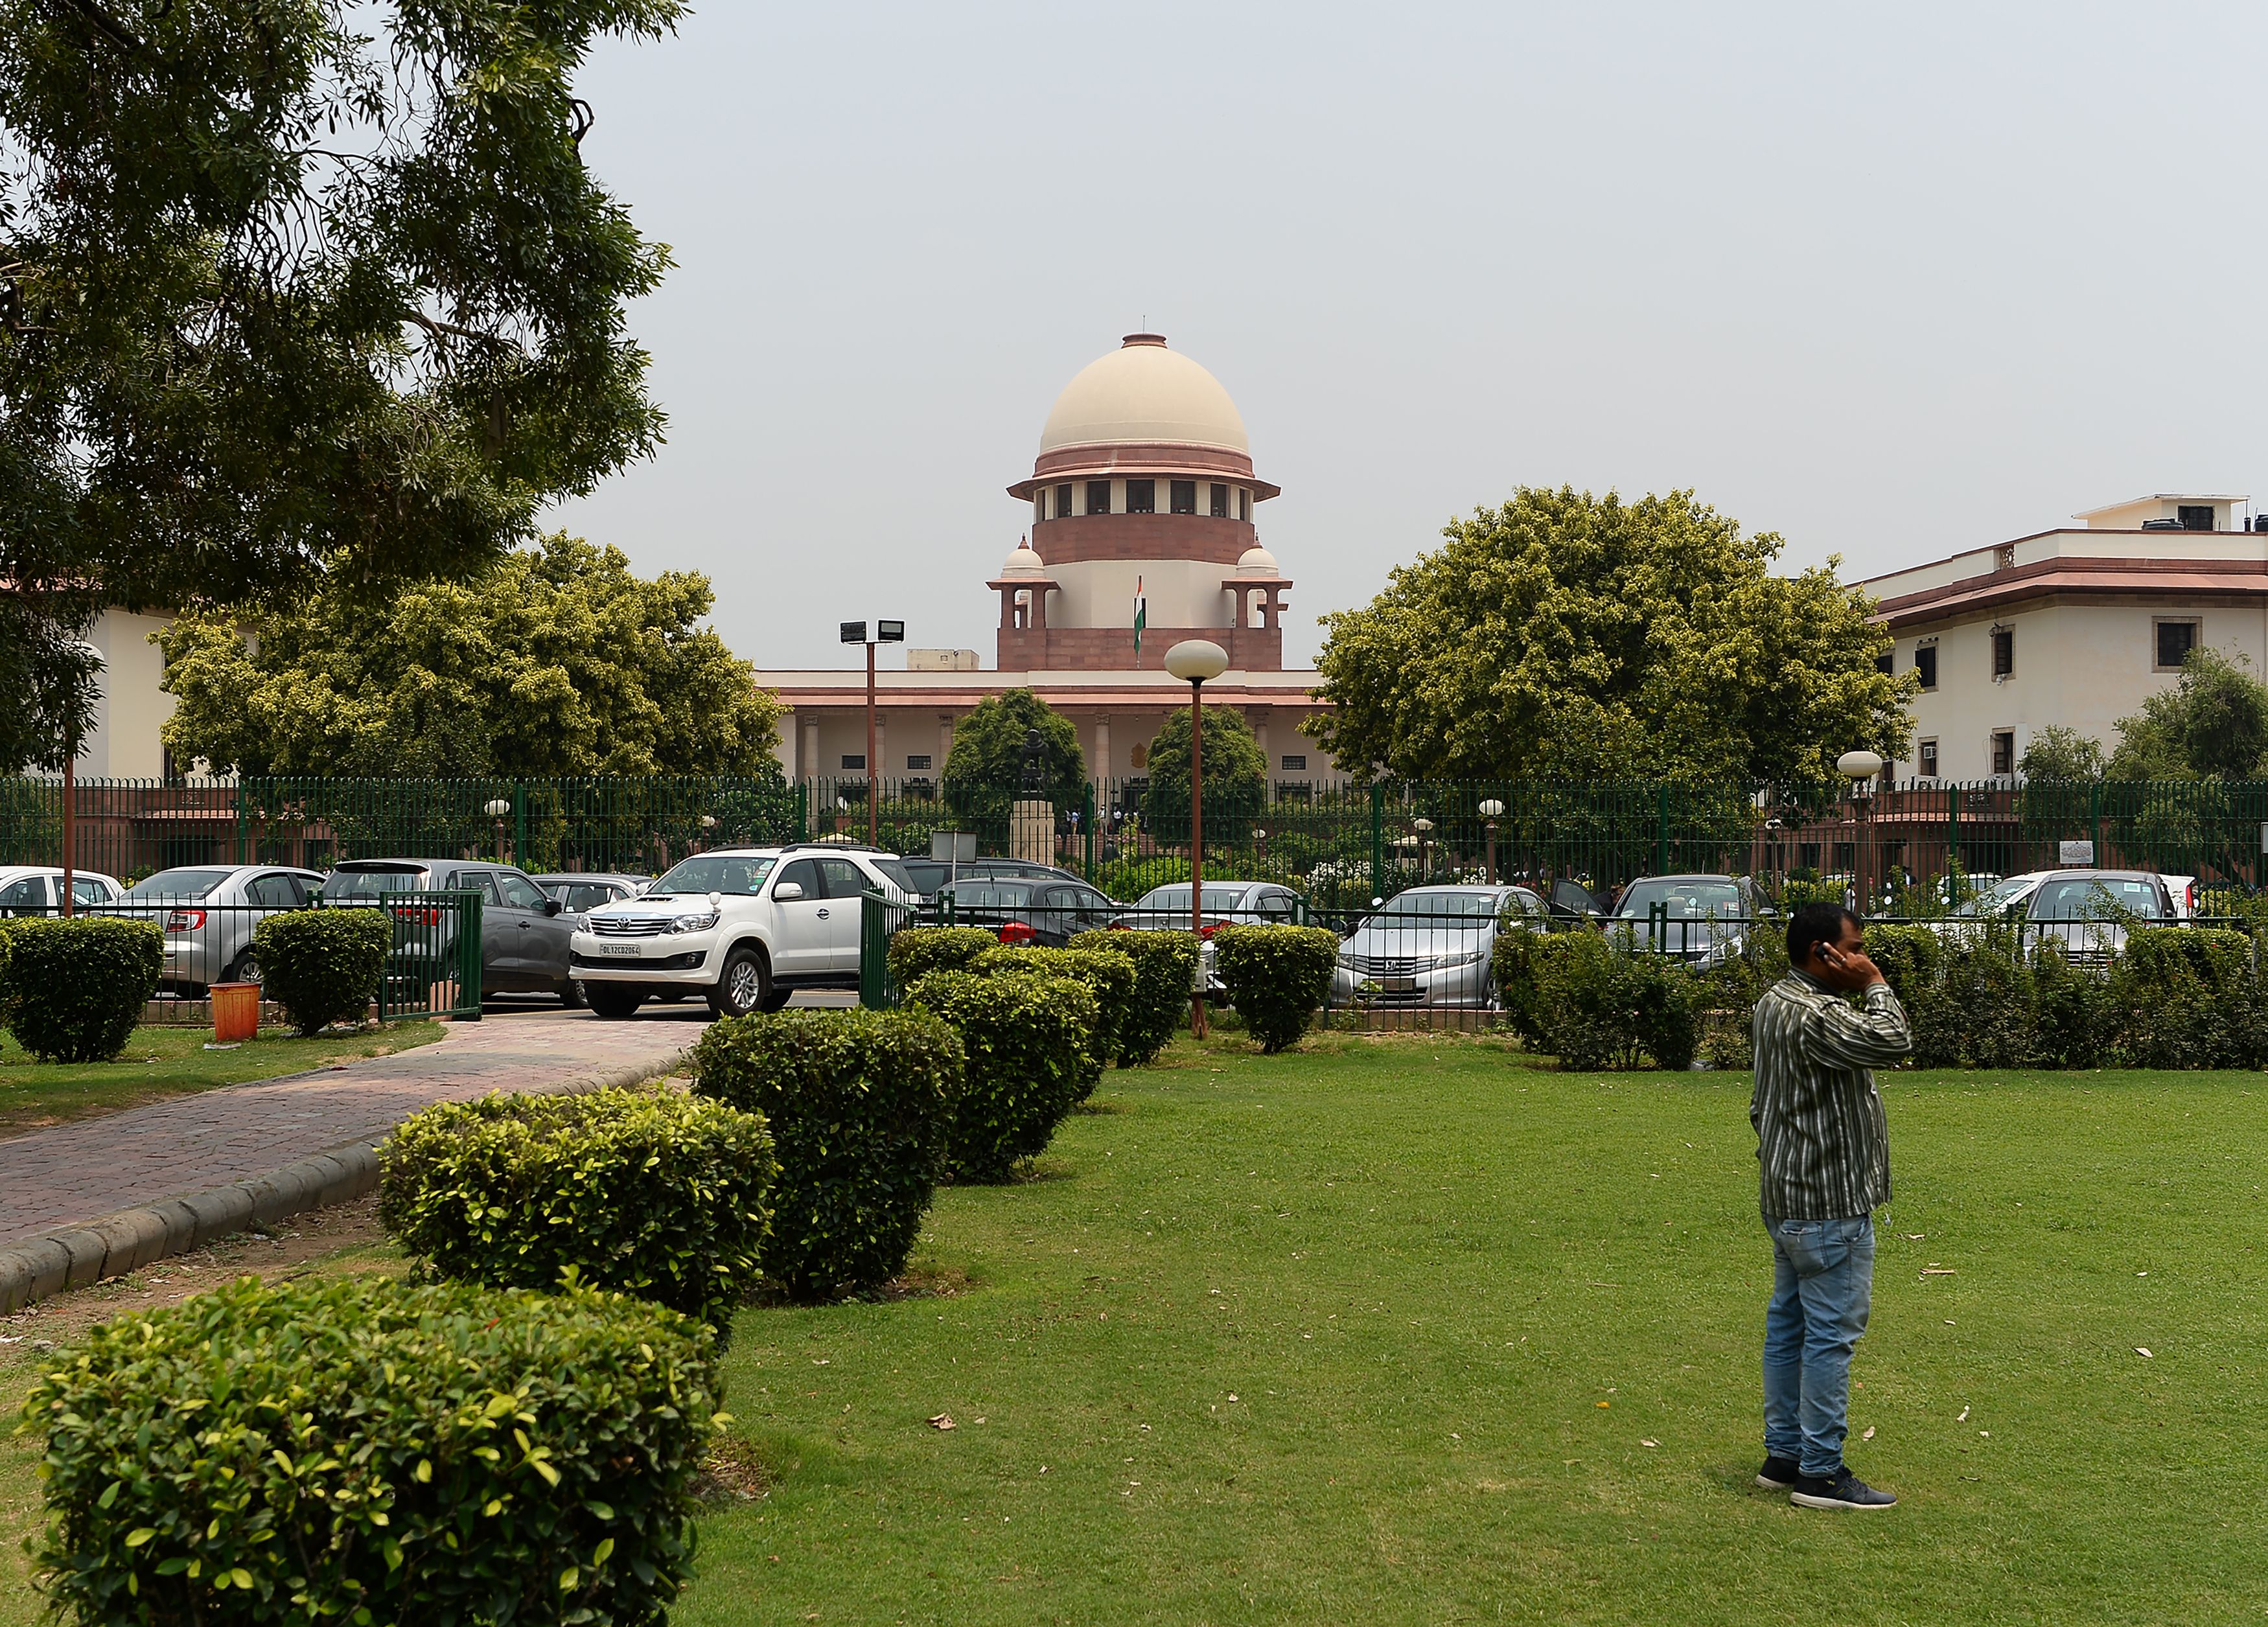 The Indian Supreme Court will next hear the matter on 27 July